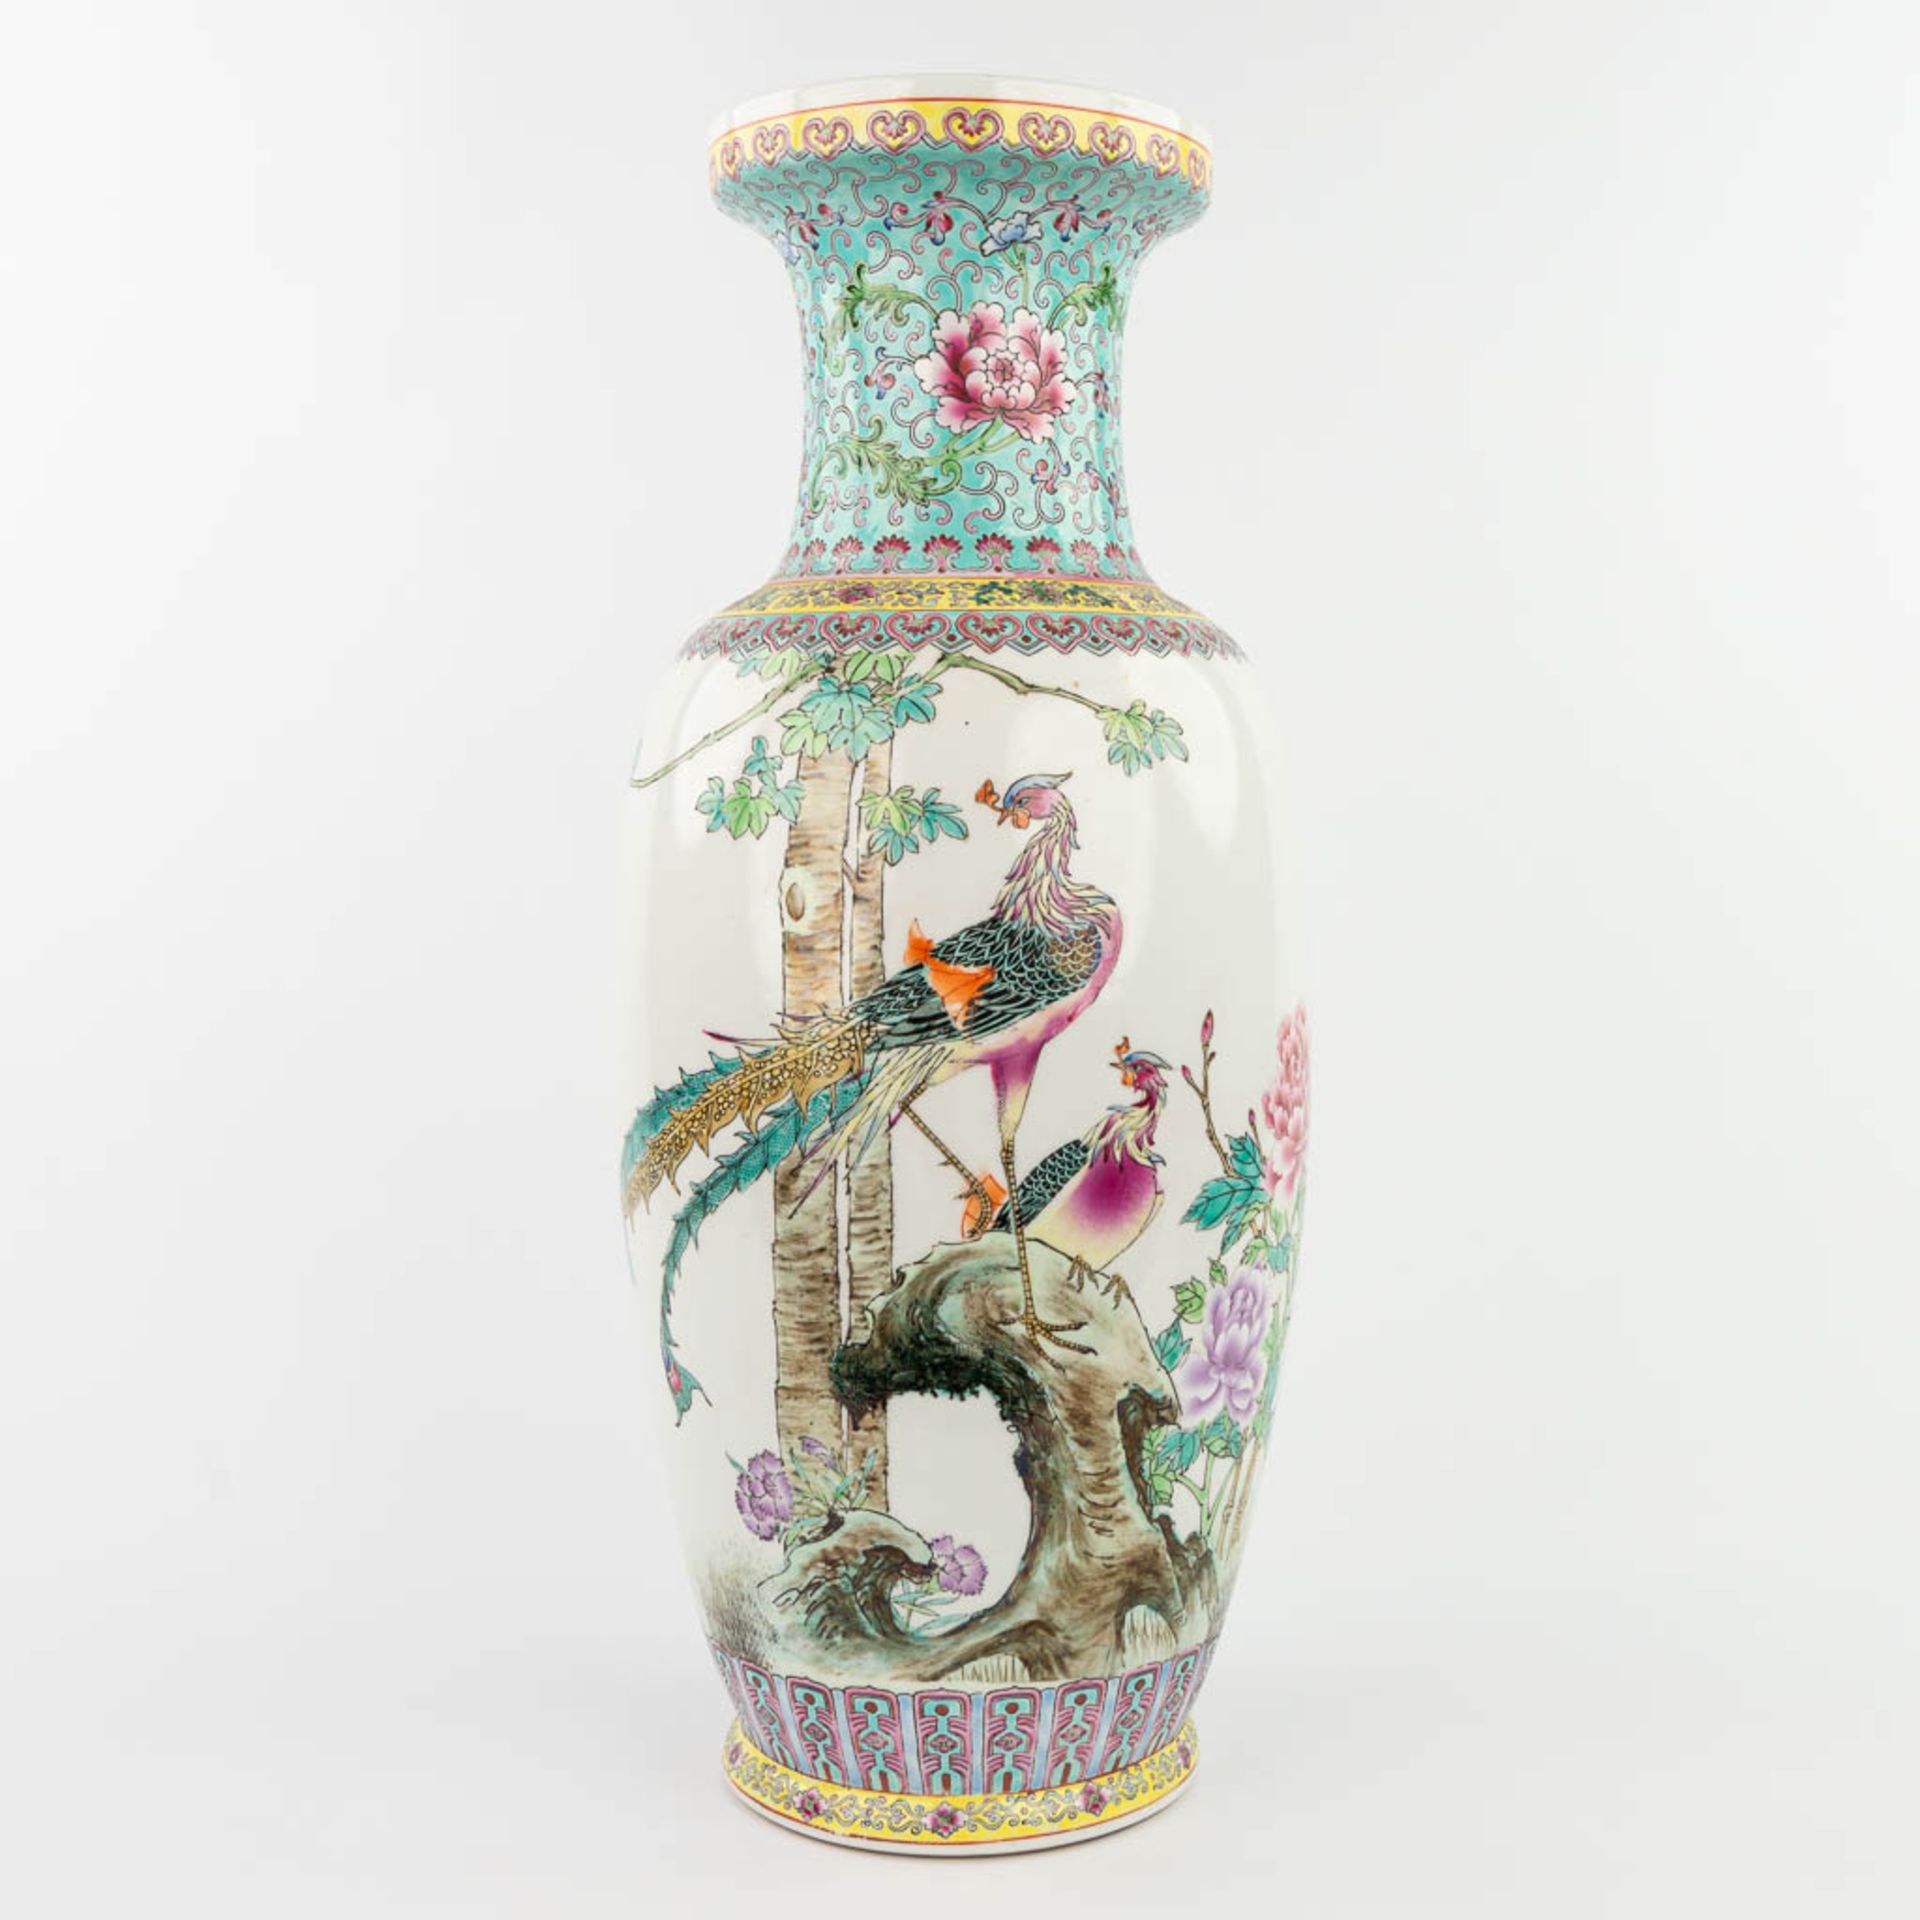 A Chinese vase made of porcelain and decorated with peacocks. 20th C. (60,5 x 23,5 cm)